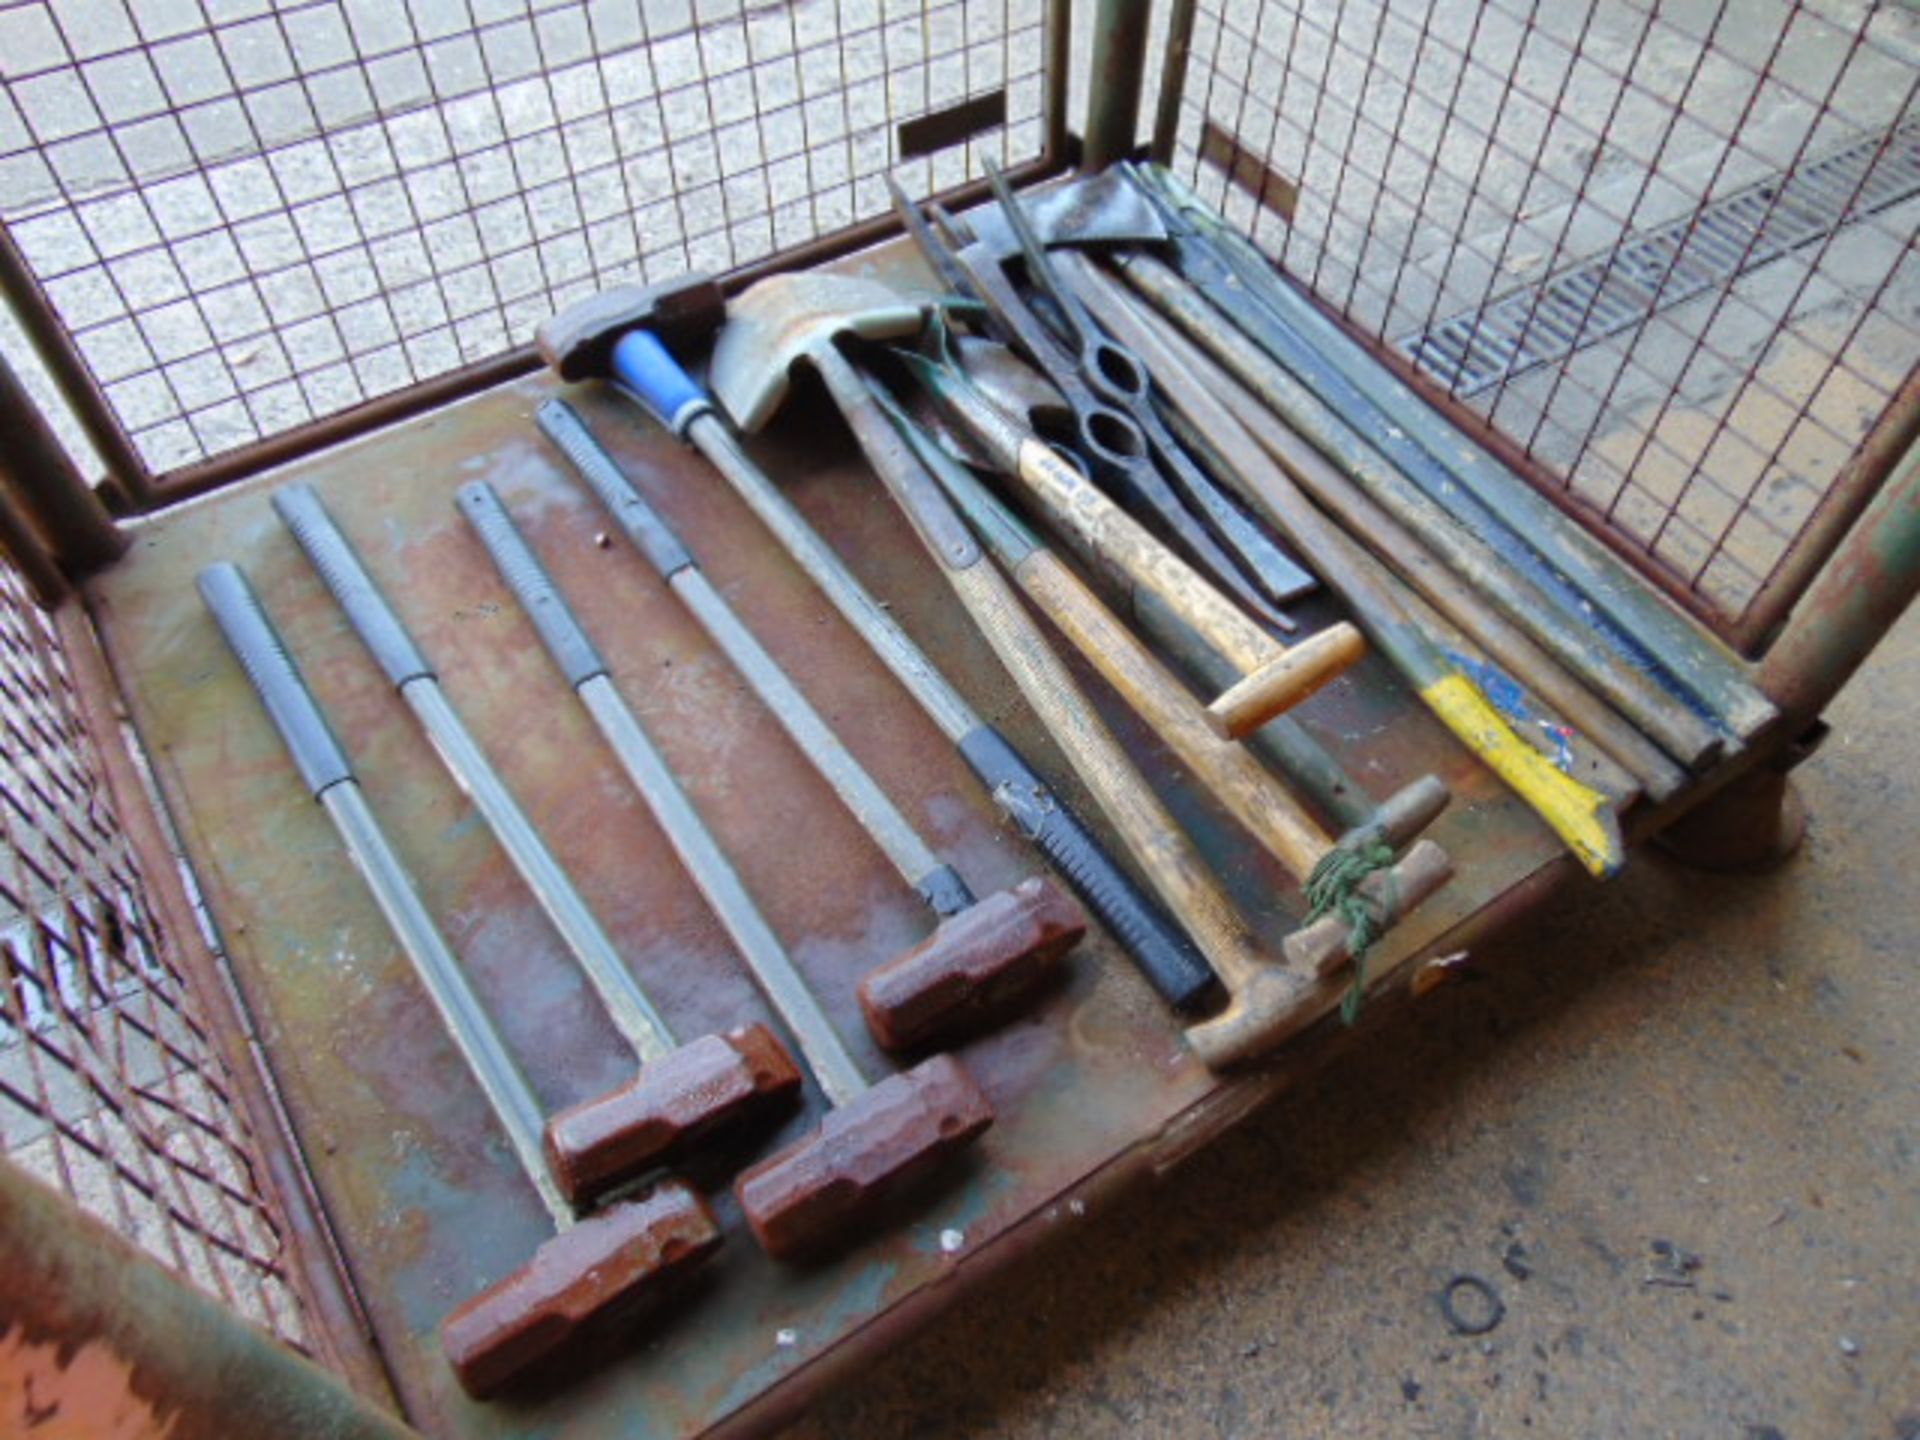 1 x Stillage British Army Axes, Sledge Hammers, T handle Shovels, Picks and helves (20 items) - Image 2 of 5